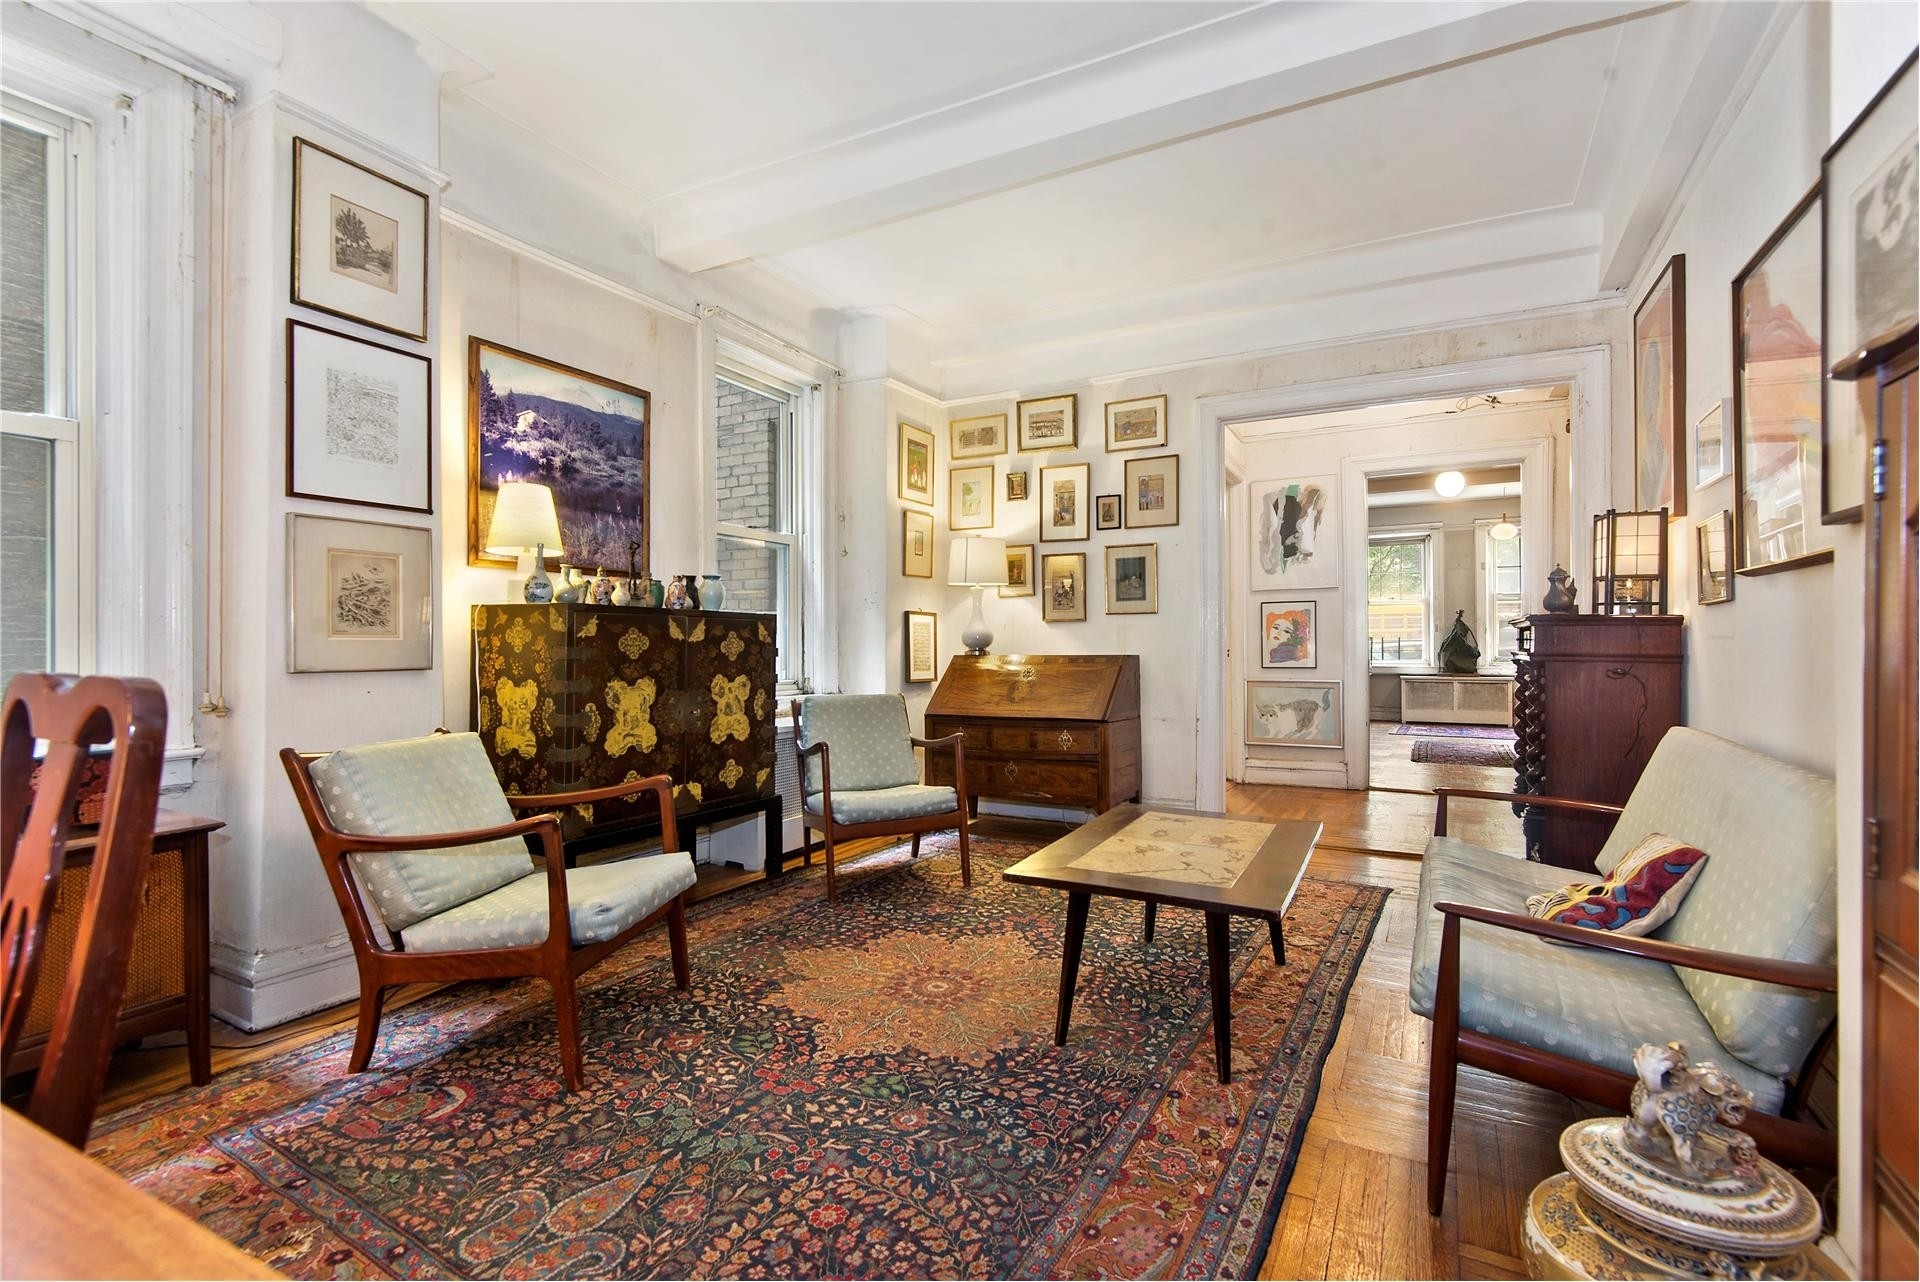 Property at 20 West 77th Street Corp., 20 West 77th St, 1A New York